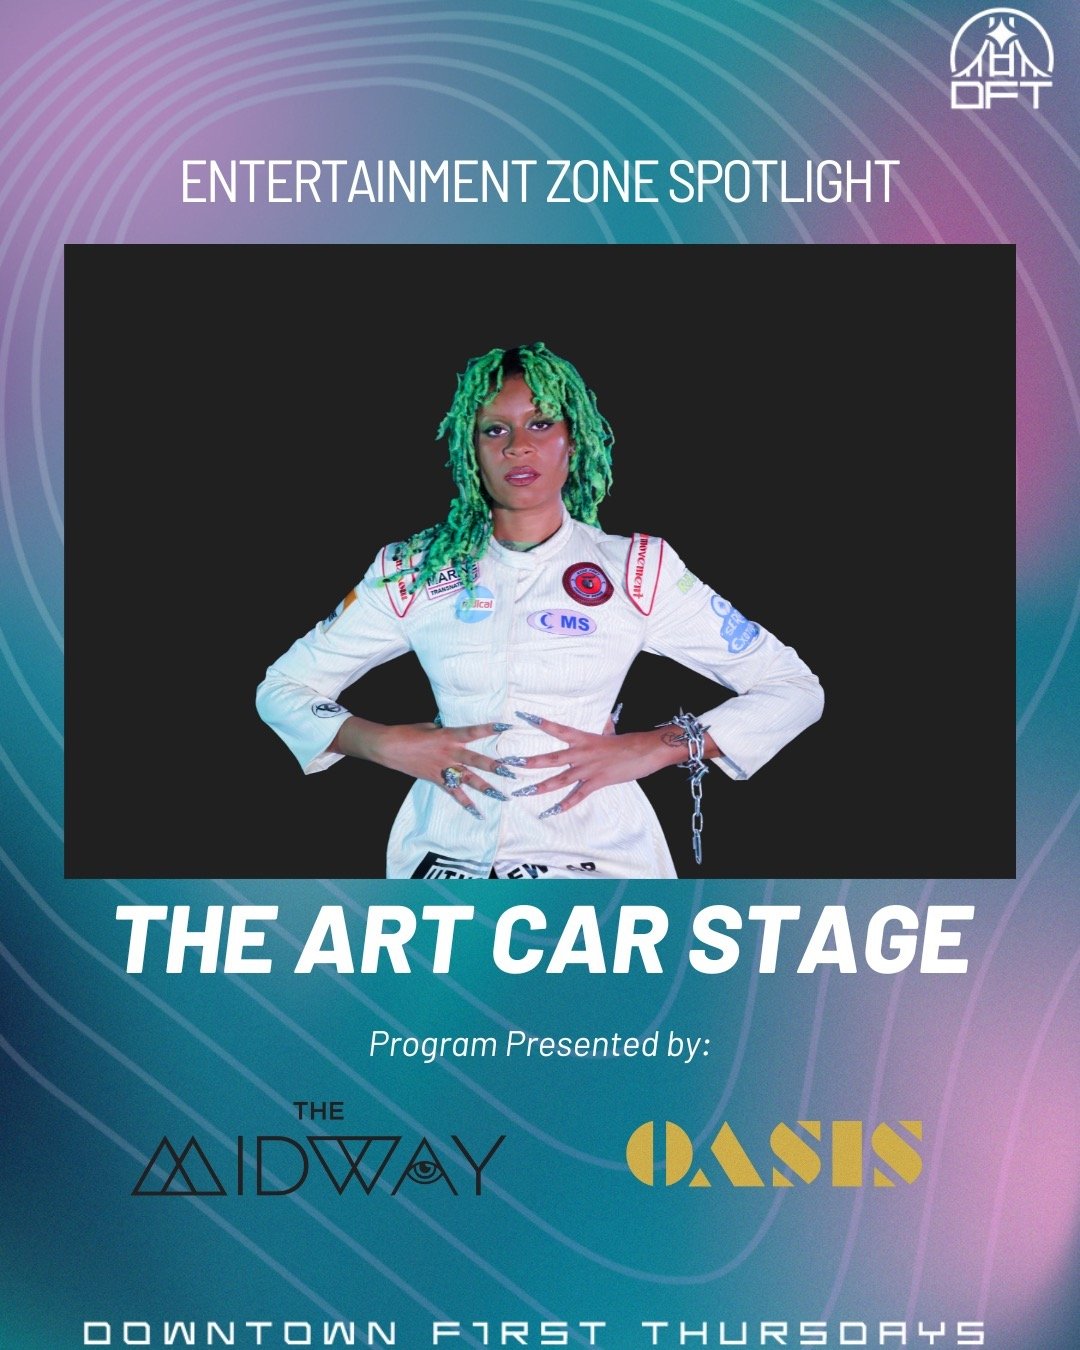 🚐 INTRODUCING: THE ART CAR STAGE!

💃🏼 @TheOasisSF will start the party with drag, DJs, and more in the early evening and set the stage for special guest performers @Aluna &mdash; brought to us by @TheMidwaySF to close out the night!

✨ We&rsquo;re